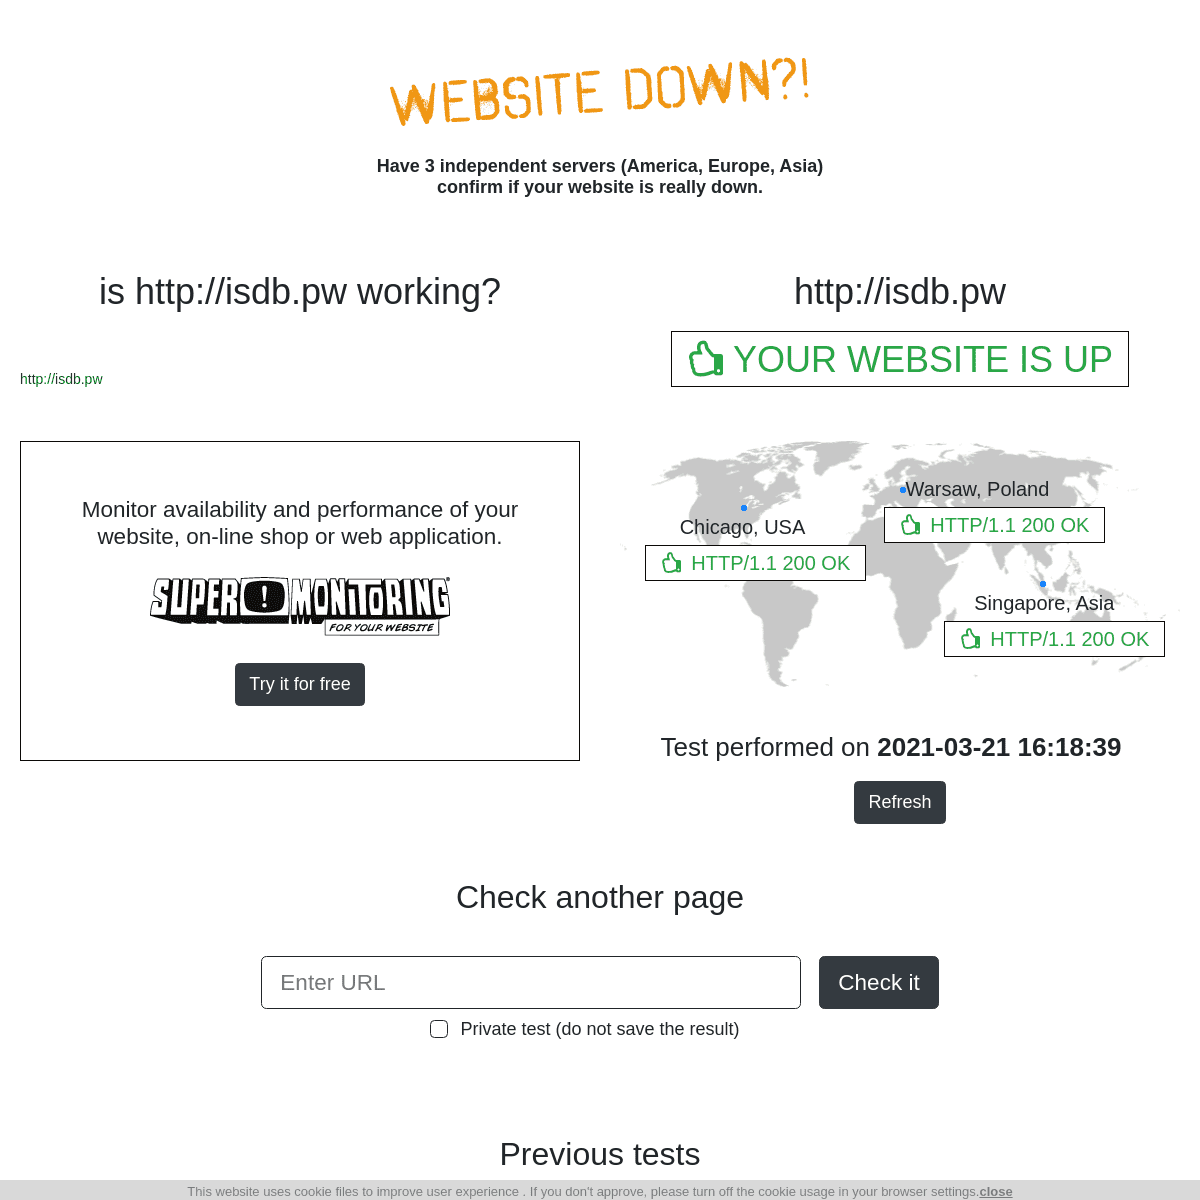 A complete backup of https://www.website-down.com/http%253A%252F%252Fisdb.pw